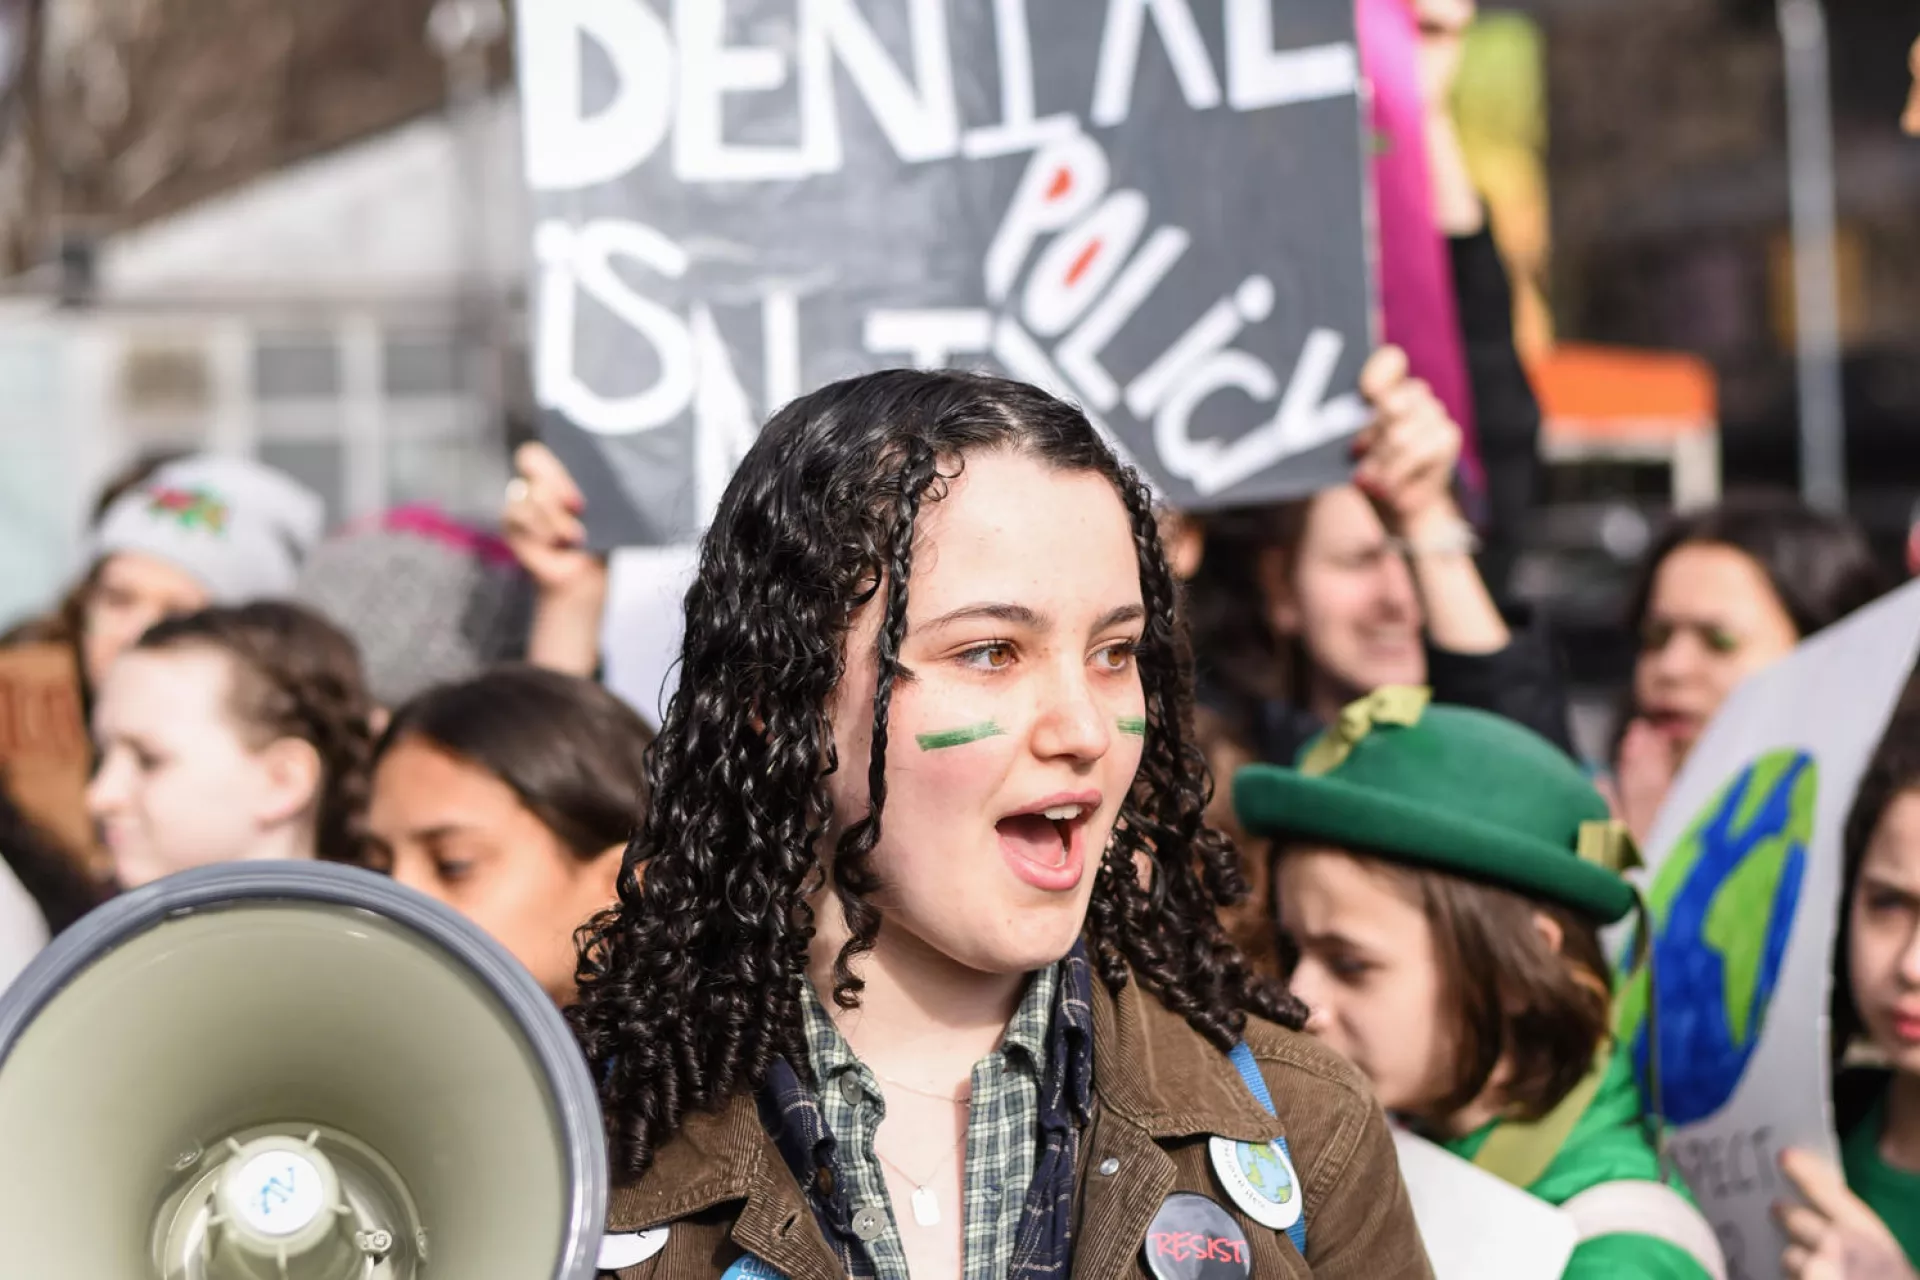 Olivia, 16, one member of a group of young people protesting in favor of environmental protection outside the United Nations on 15 March 2019.